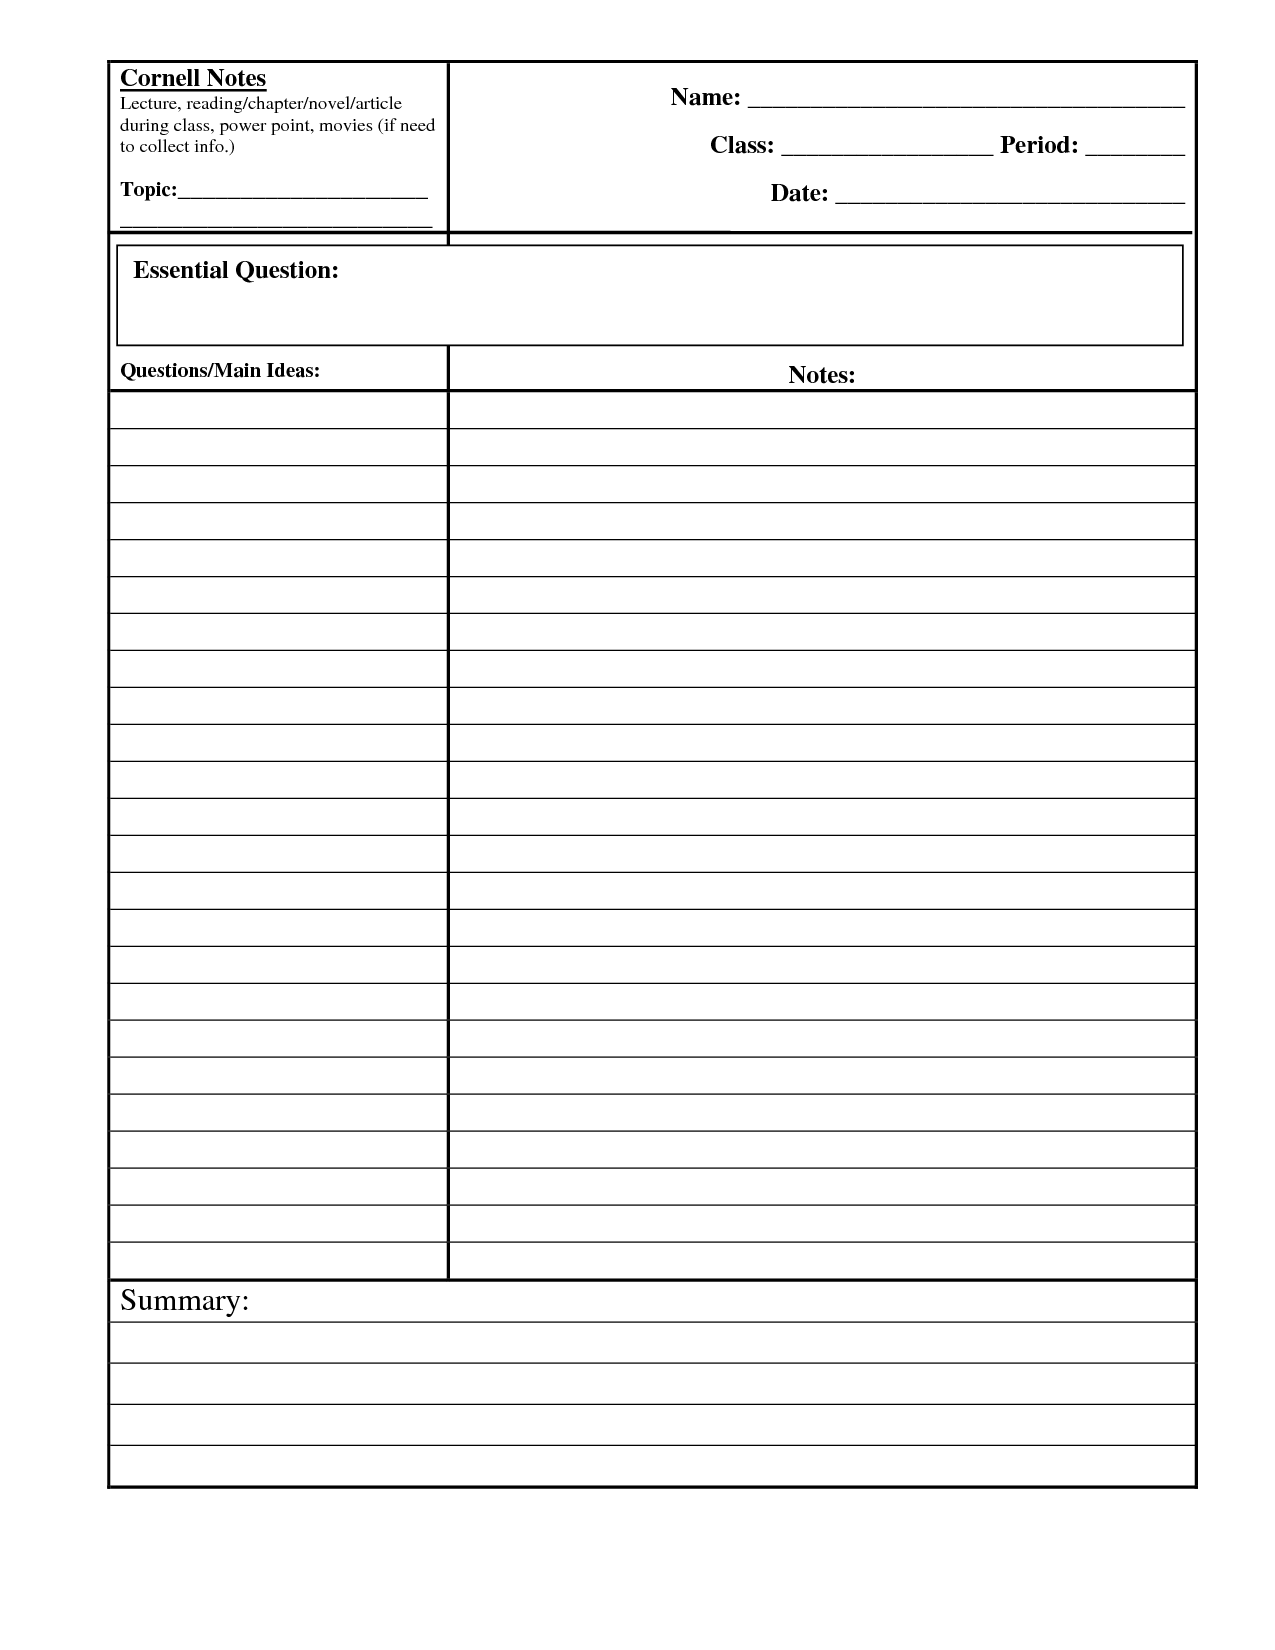 Cornell Notes Template | aplg planetariums.org